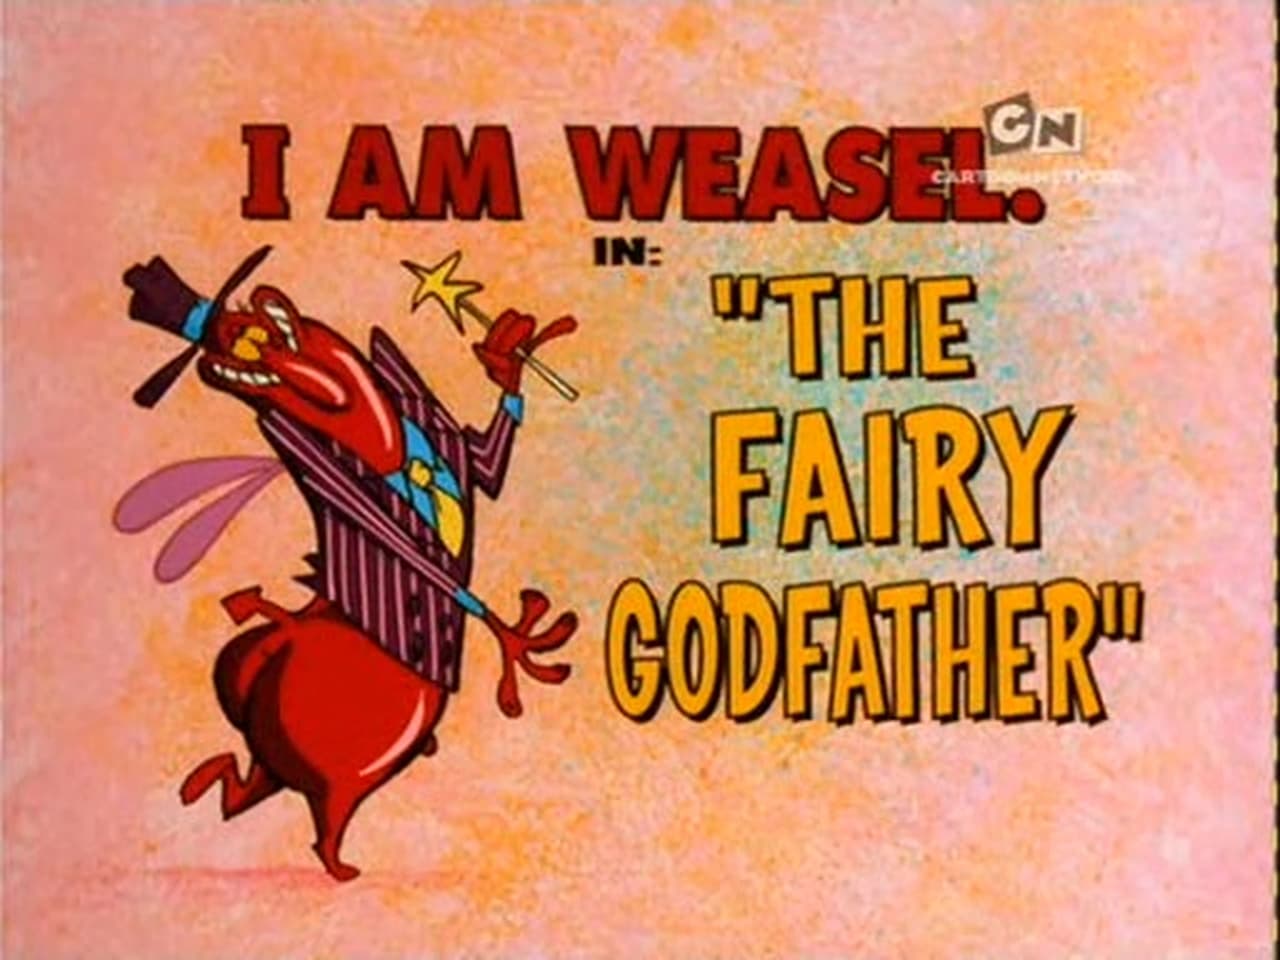 The Fairy Godfather